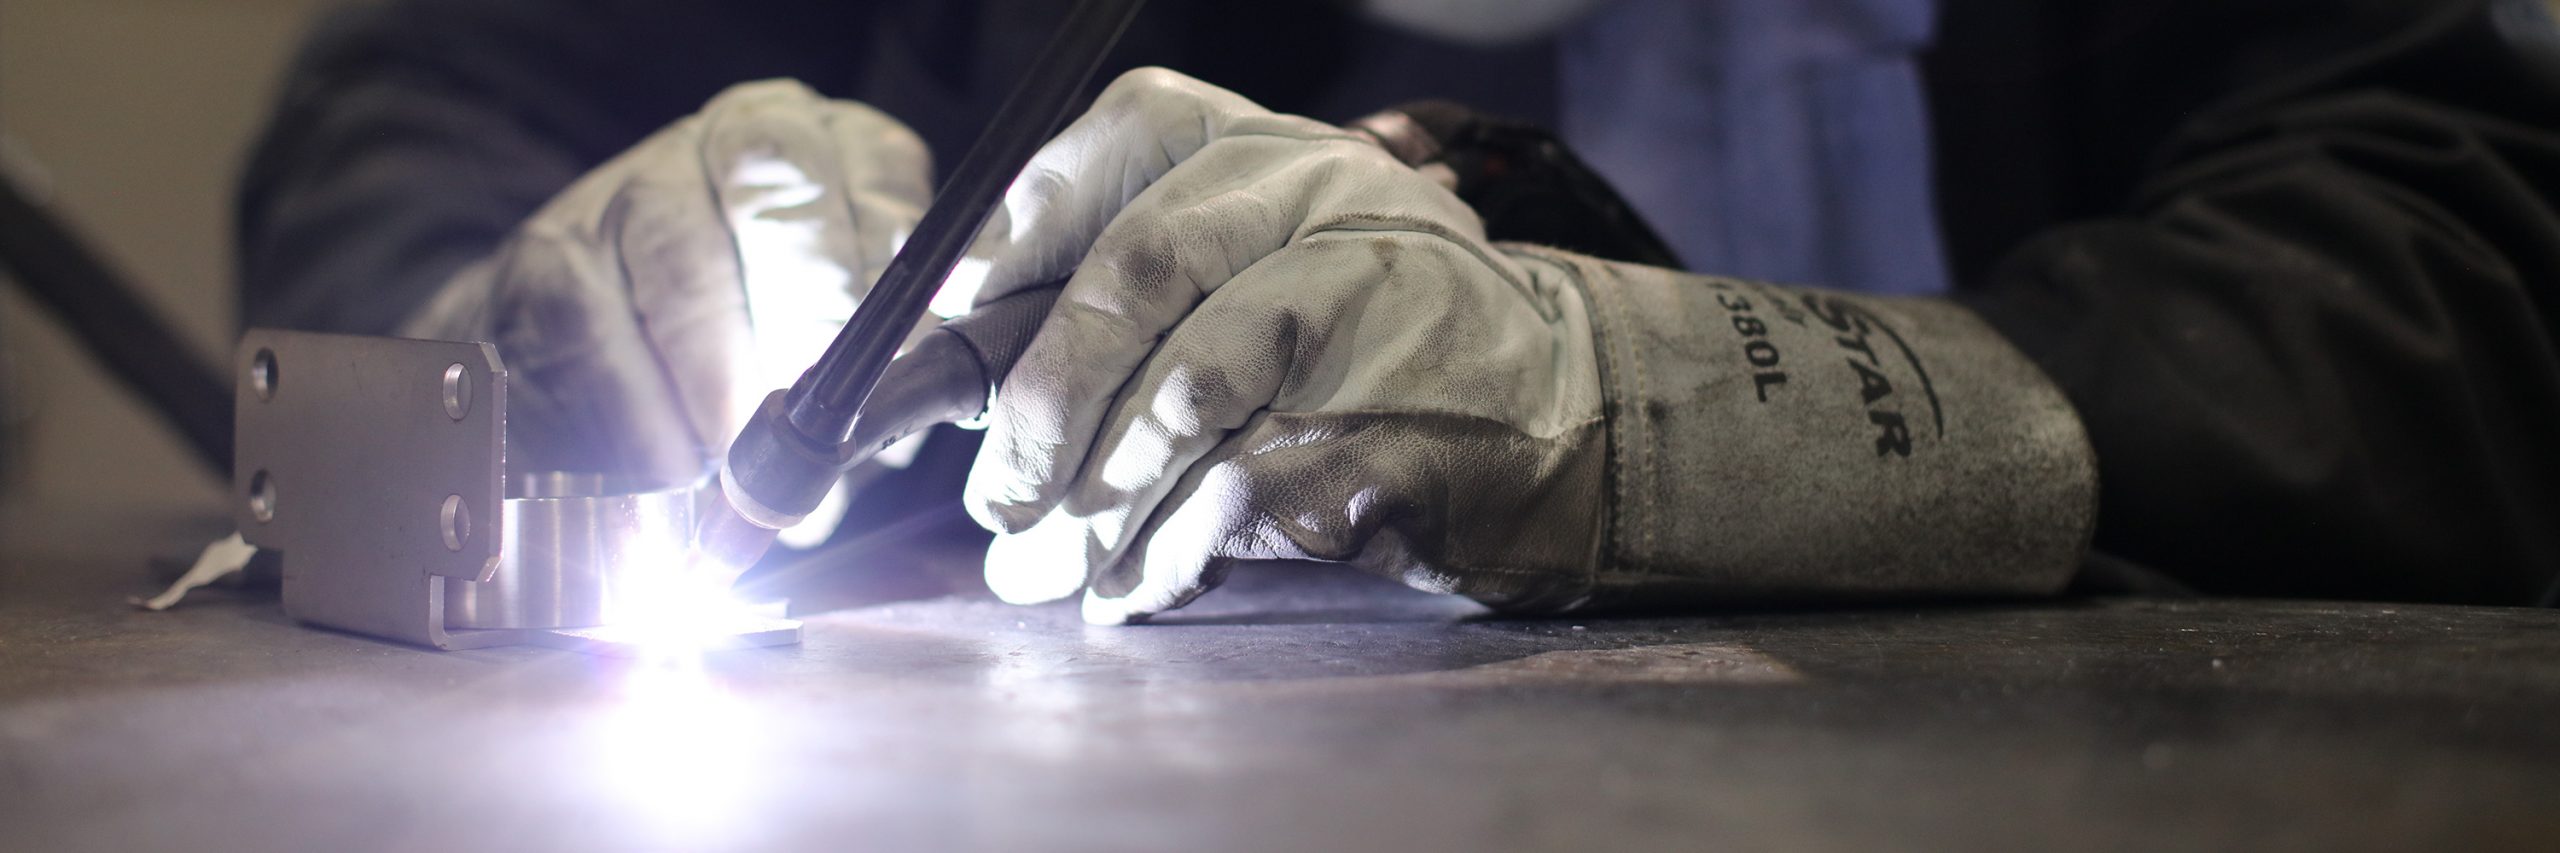 two gloved hands use a welding gun on a component